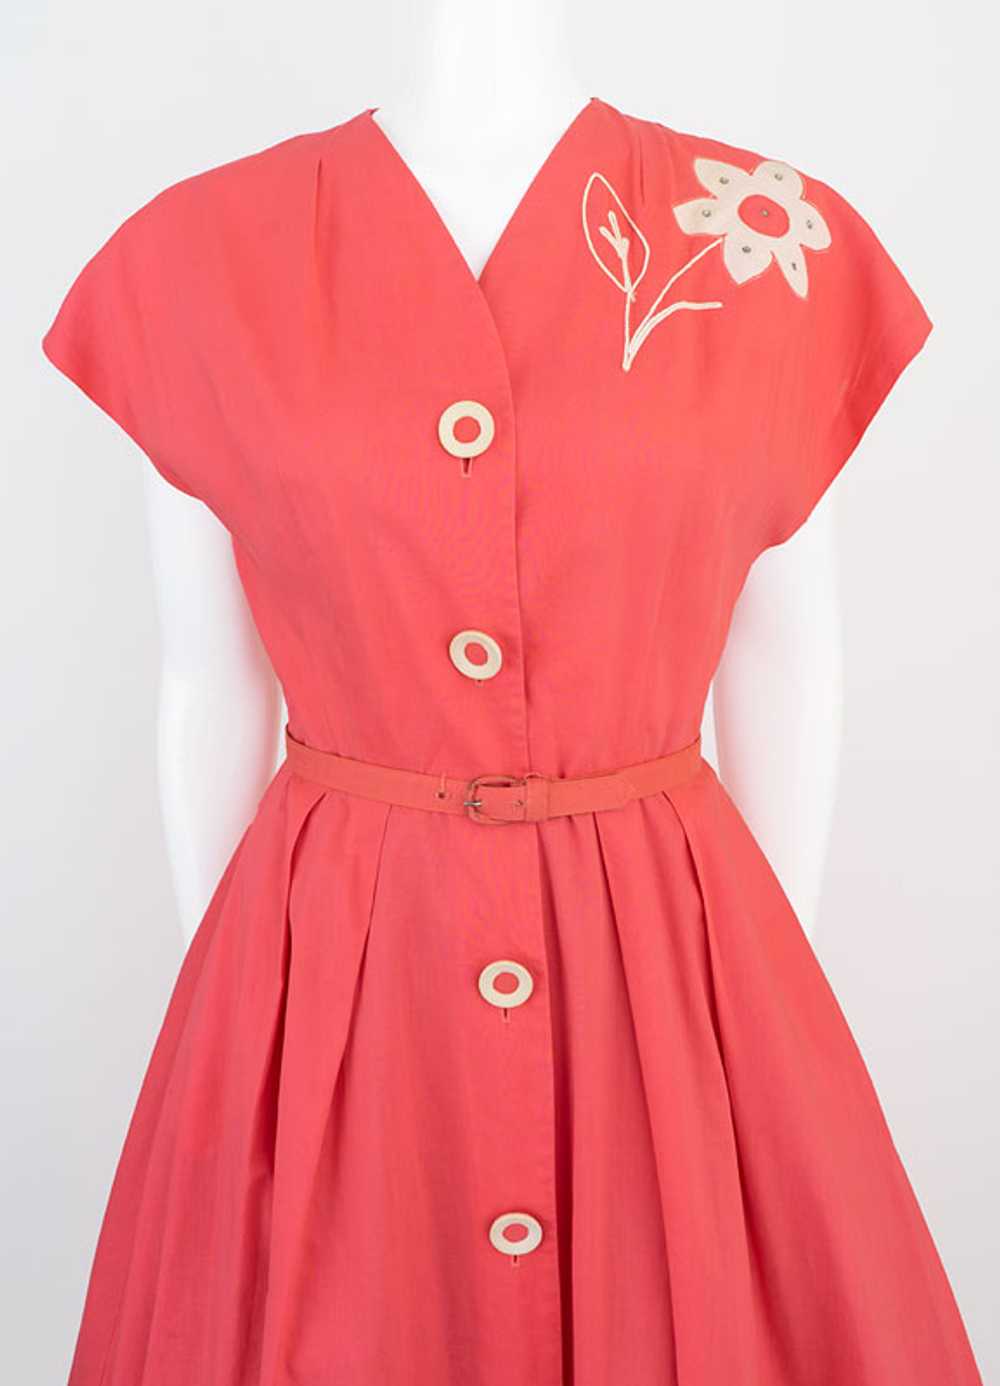 Pretty in Pink 1950s Dress - image 3